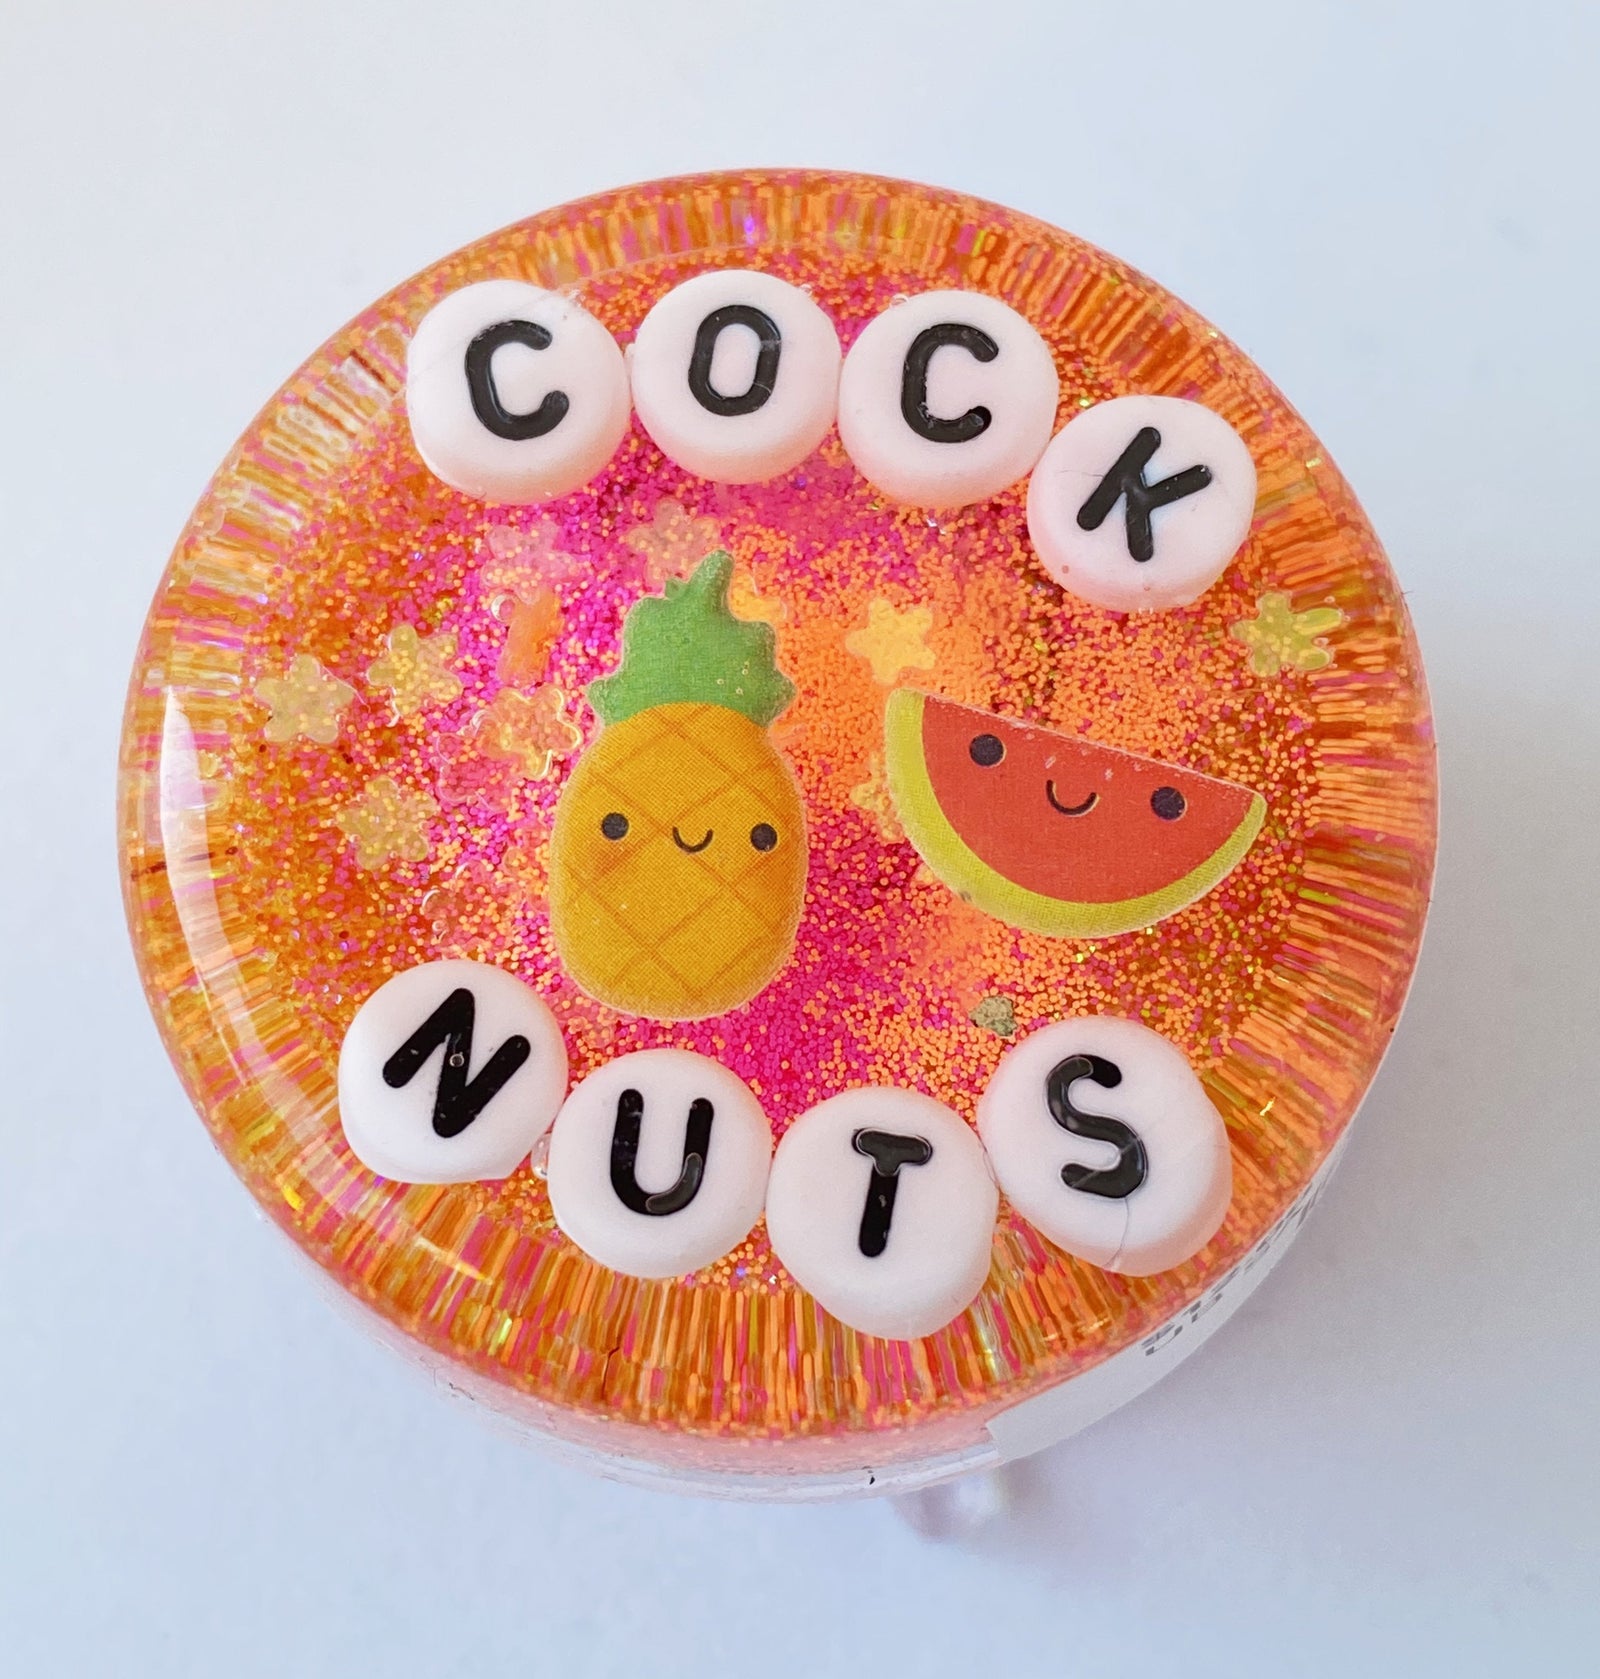 Cock Nuts - Shower Art - READY TO SHIP *